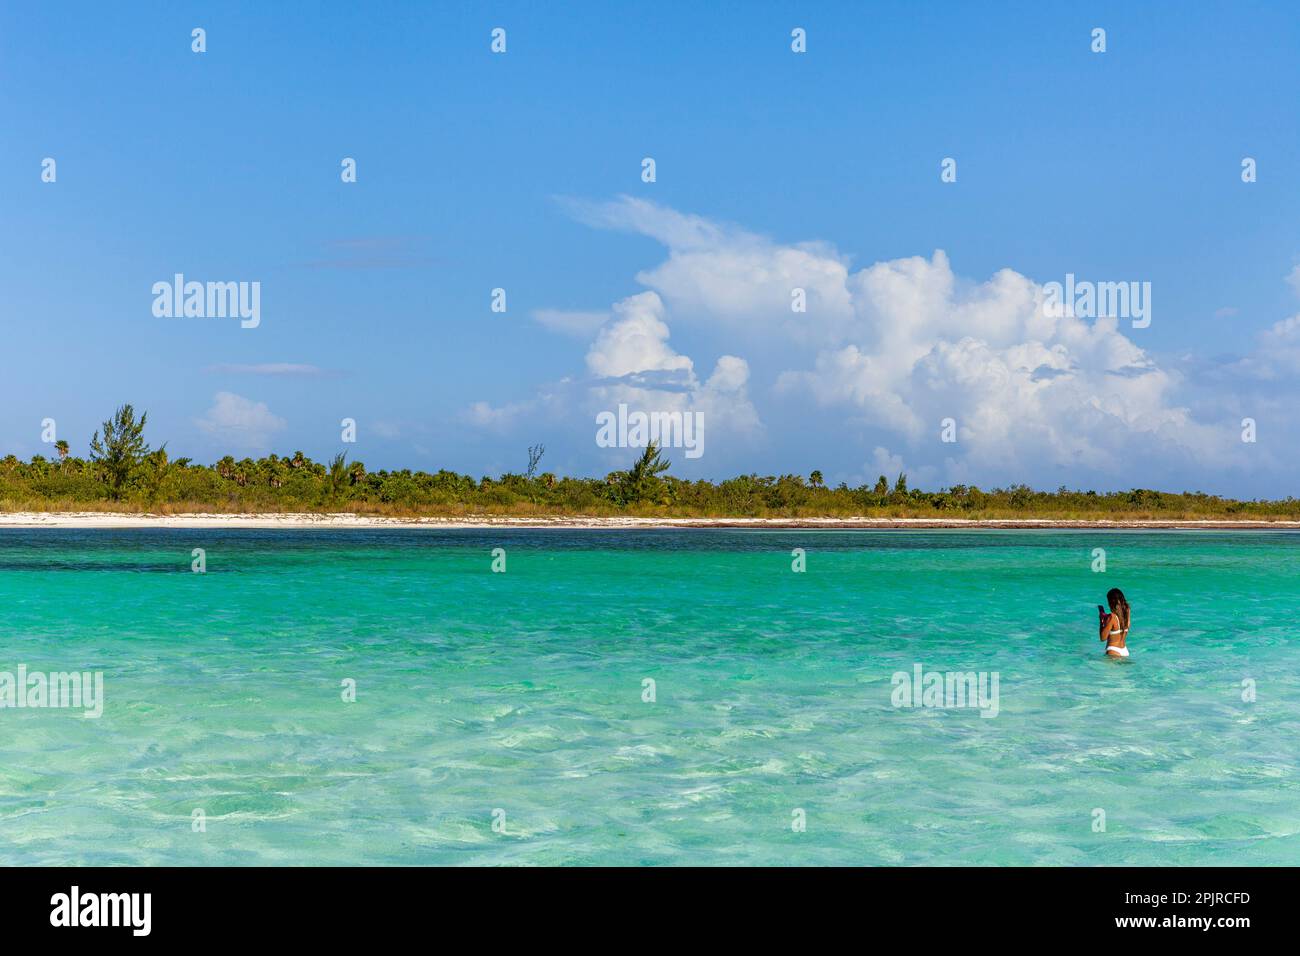 Young woman enjoying the Caribbean turquoise waters of El Cielo Bay on the island of Cozumel, Yucatán Peninsula, Mexico Stock Photo